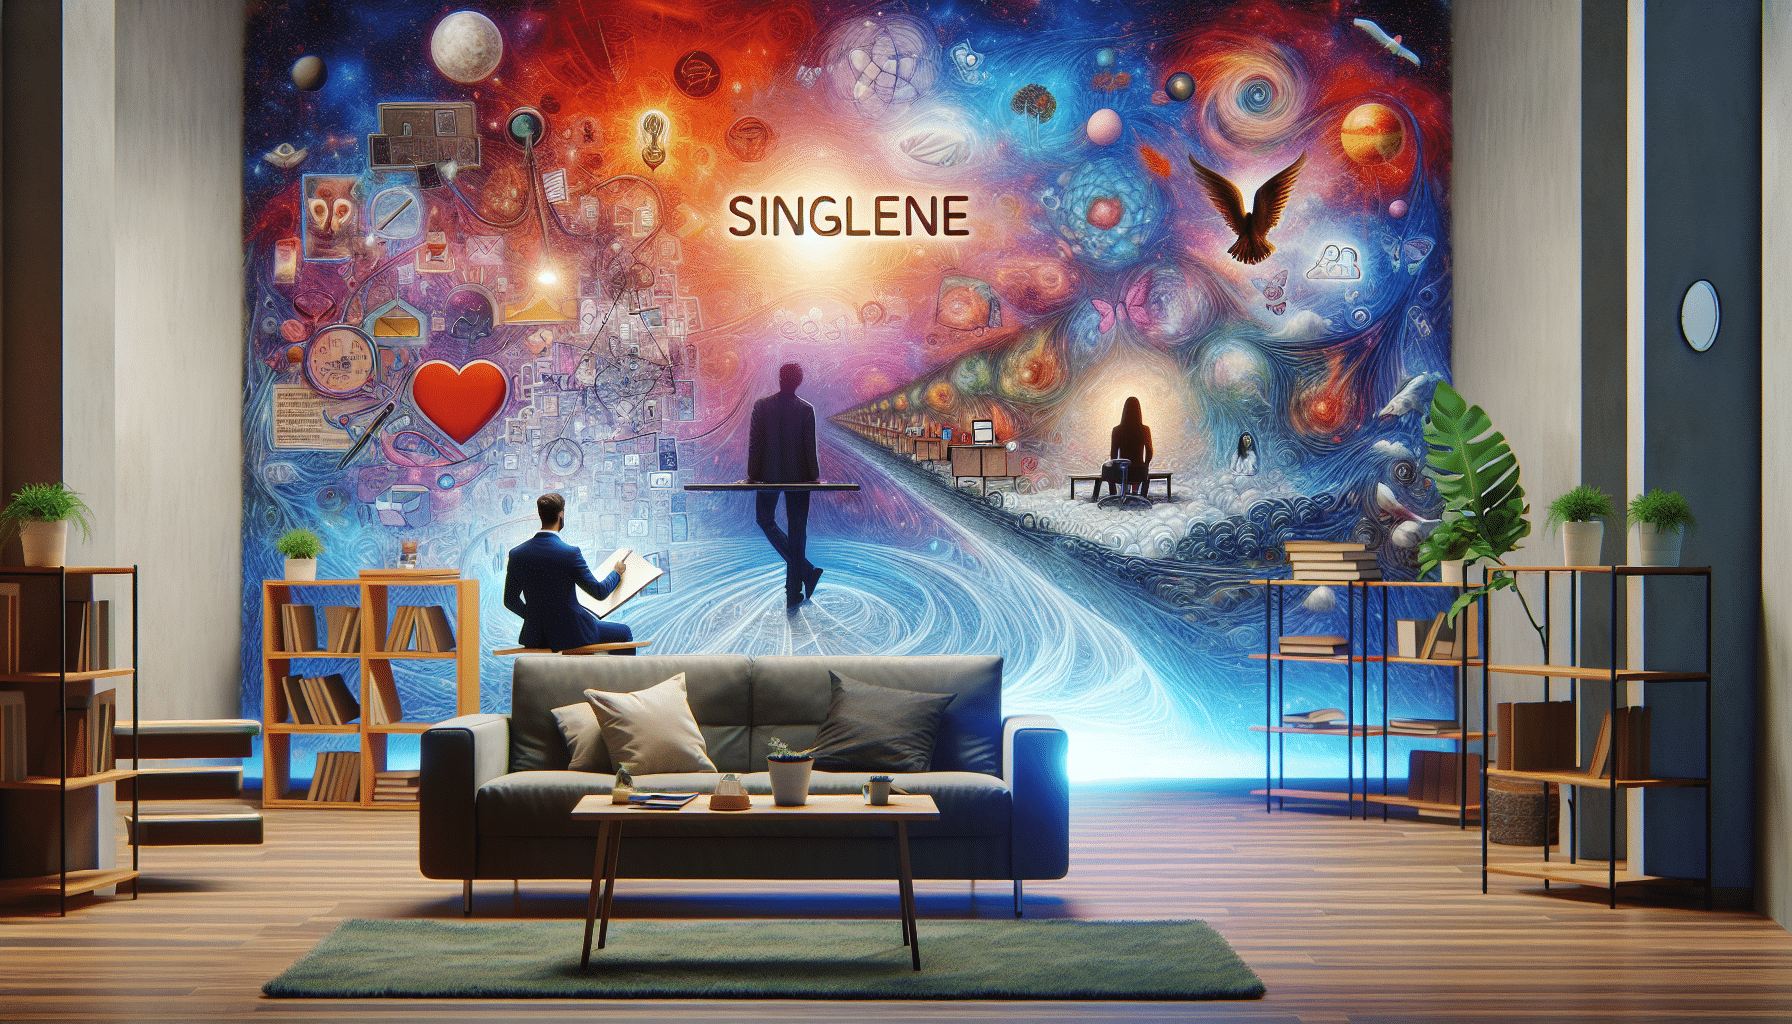 gain insights from a psychologist on understanding long-term singleness in this thought-provoking article.